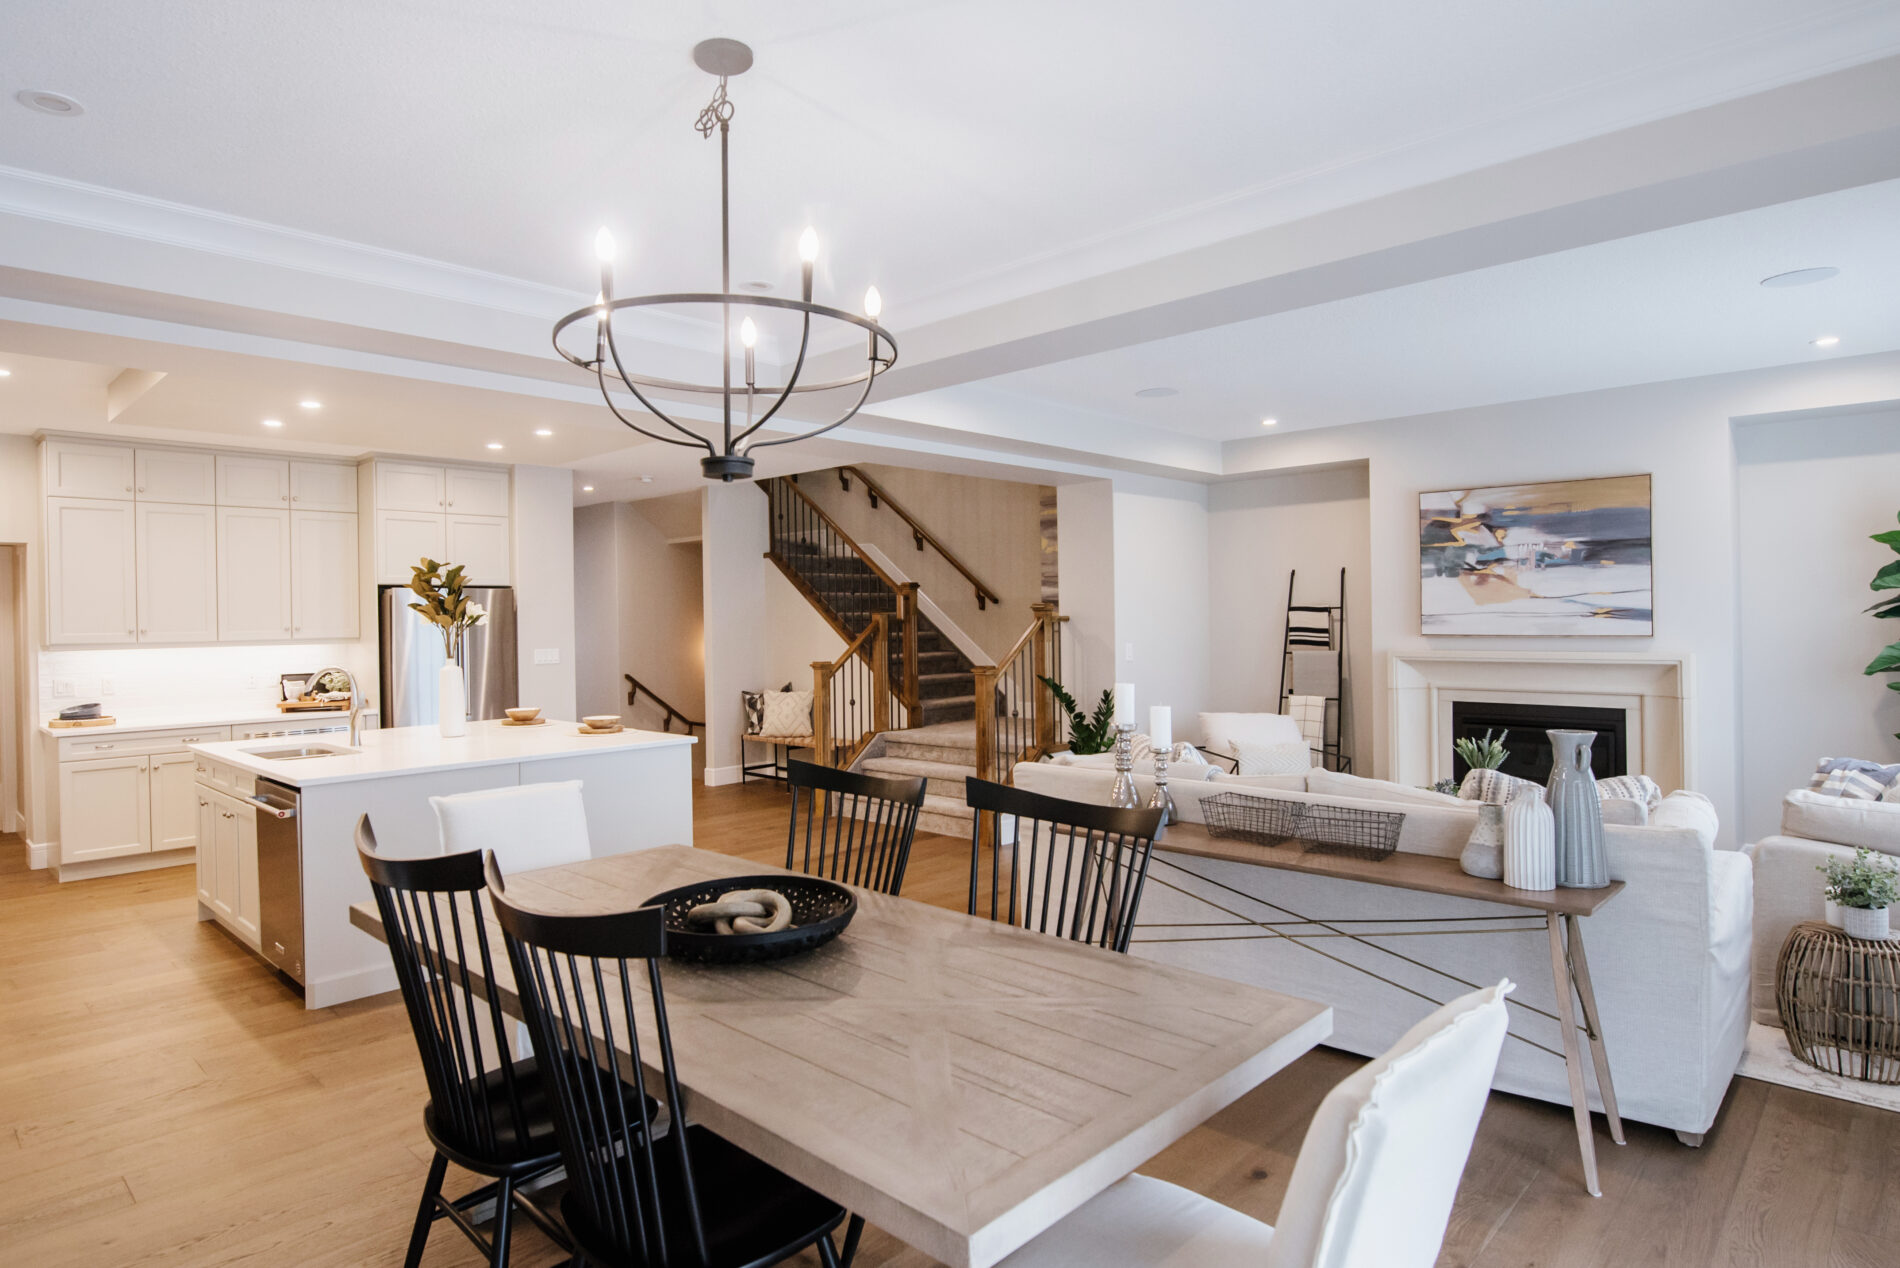 Photo of the open concept main floor of the Kalliope showhome in Ardrossan. Showing the dining room closest, the warm inviting living room with fireplace to the right and the light and bright kitchen to the left